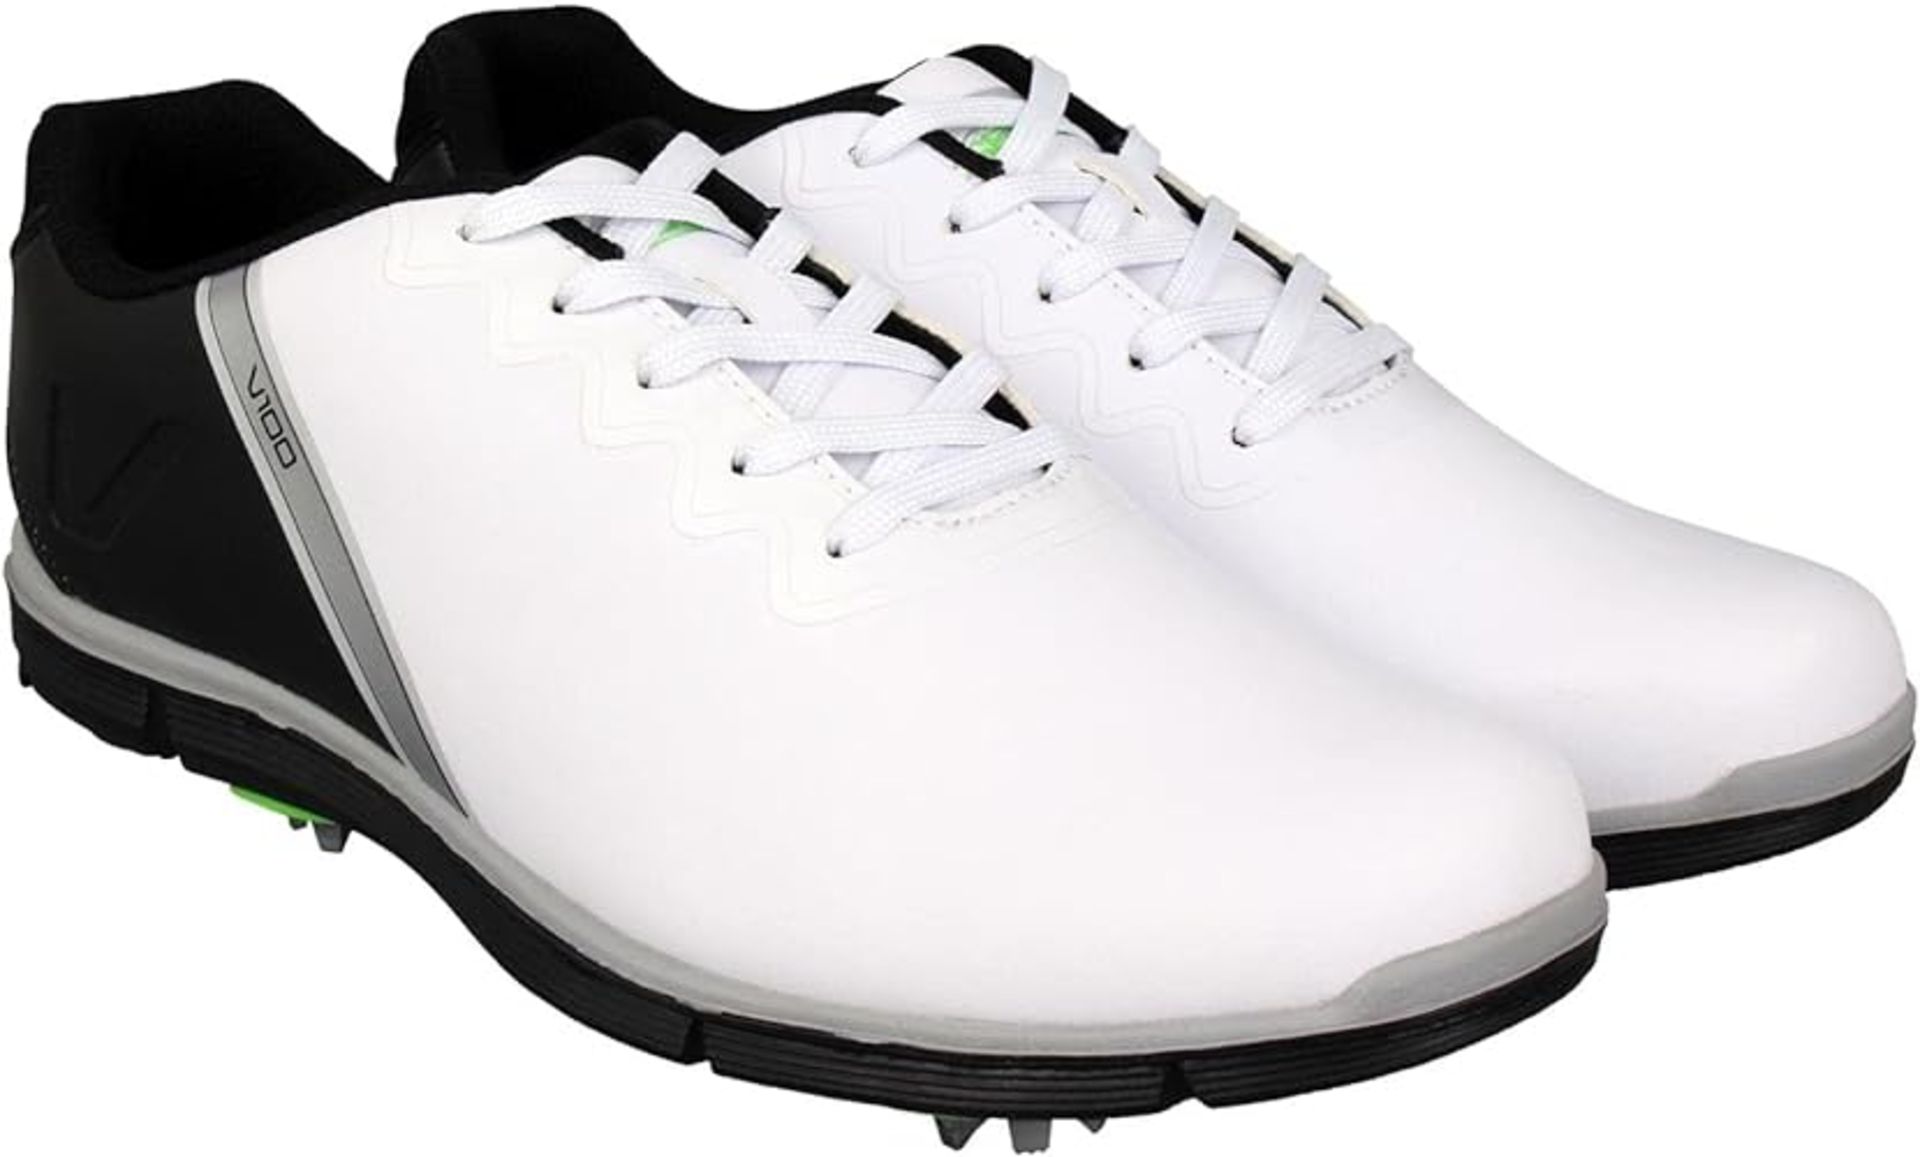 2 X BRAND NEW PAIRS OF SLAZENGER V100 PROFESSIONAL GOLF SHOES SIZE 8 RRP £89 EACH S1RA - Image 3 of 3